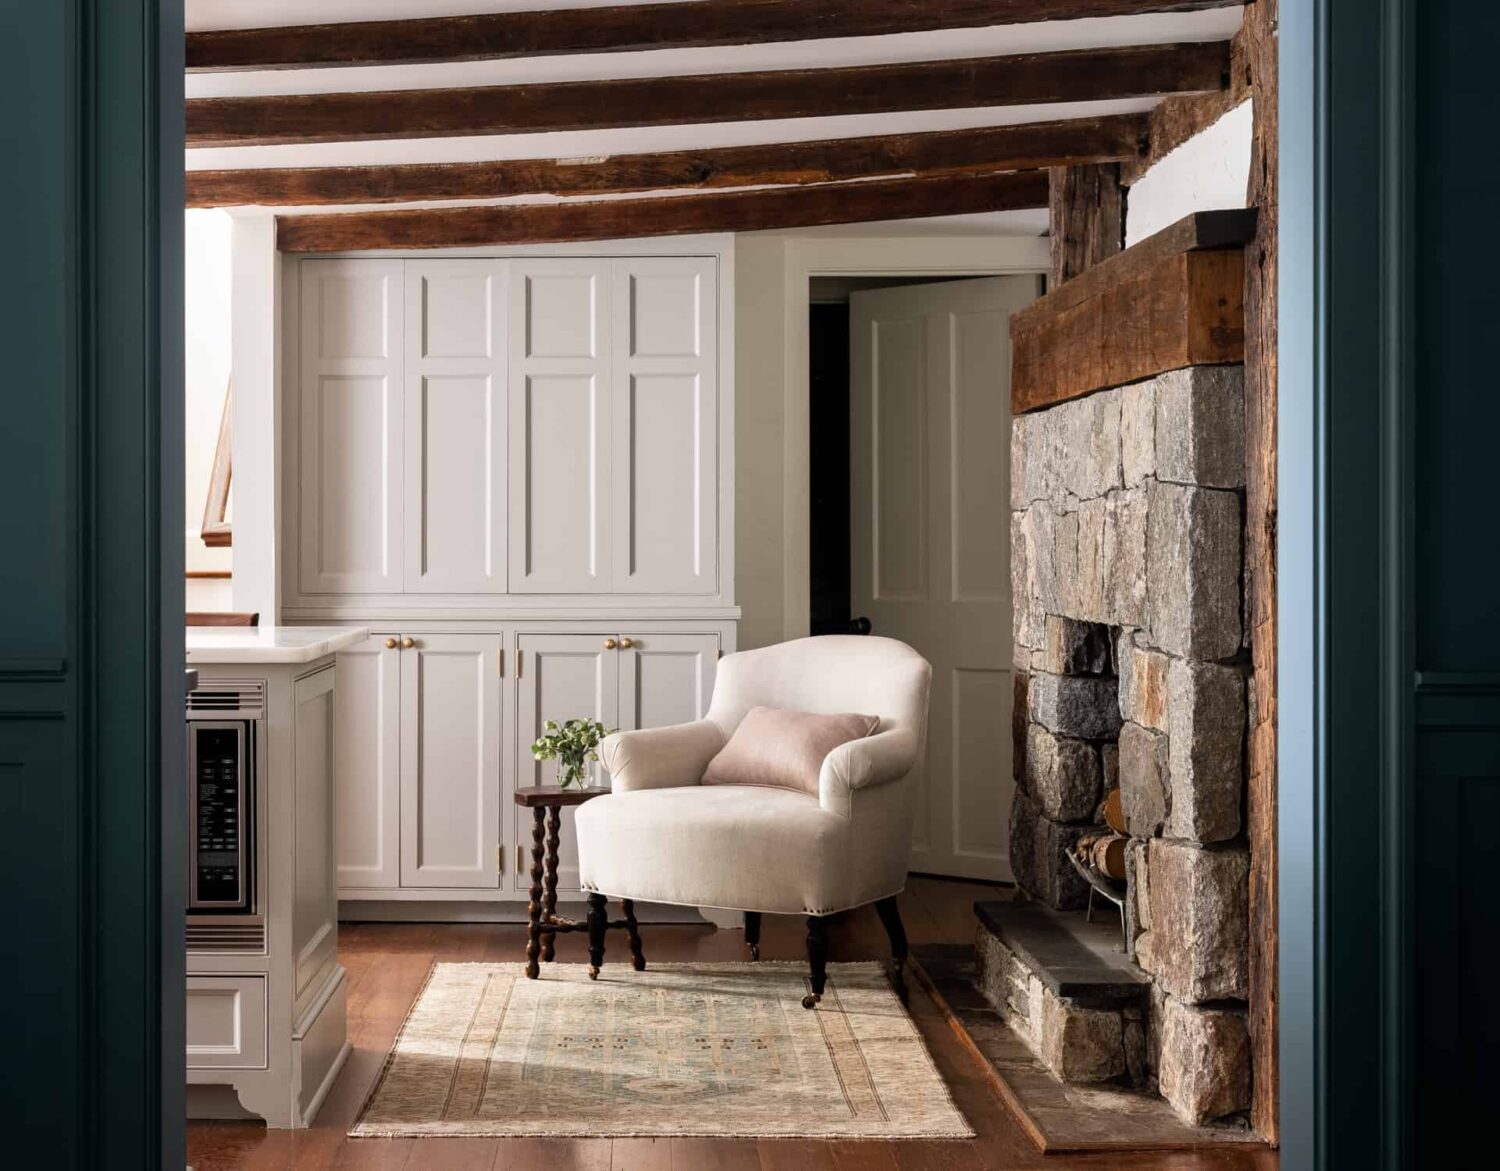 Heidi-Caillier-Design-Hudson-Valley-farmhouse-kitchen-old-beams-pantry-lounge-chair-Nordroom